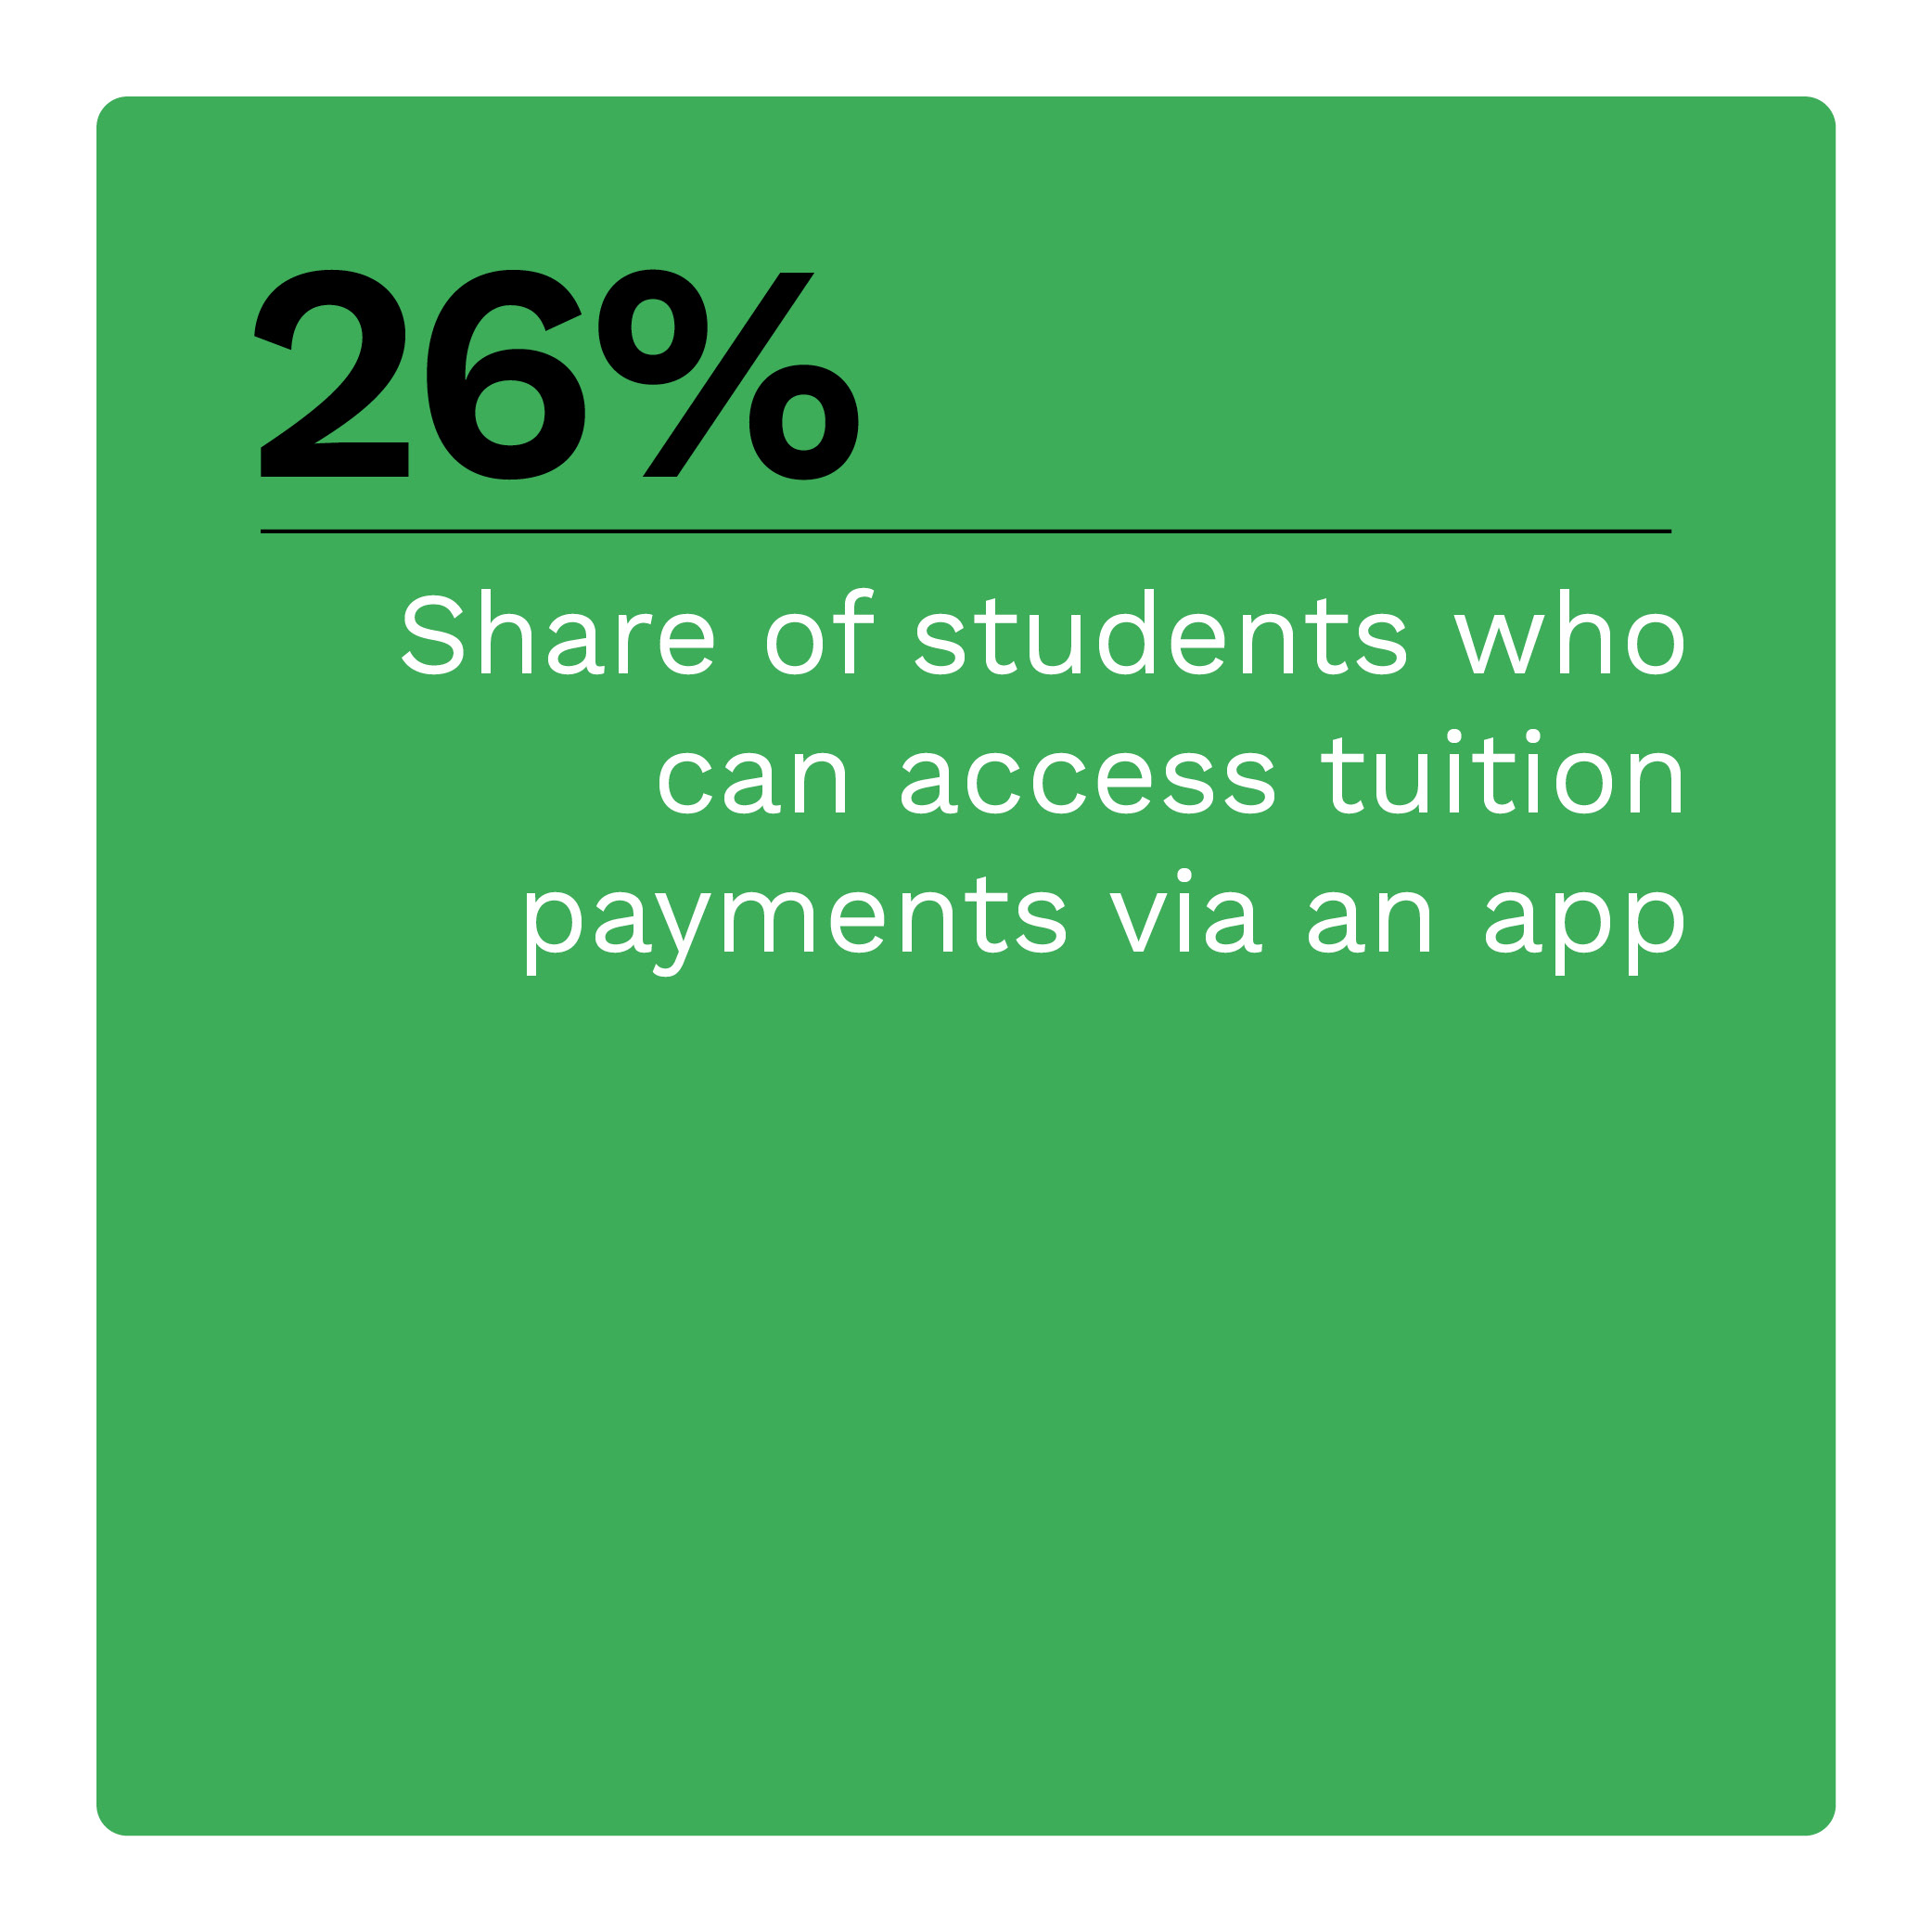 26%: Share of students who can access tuition payments via an app